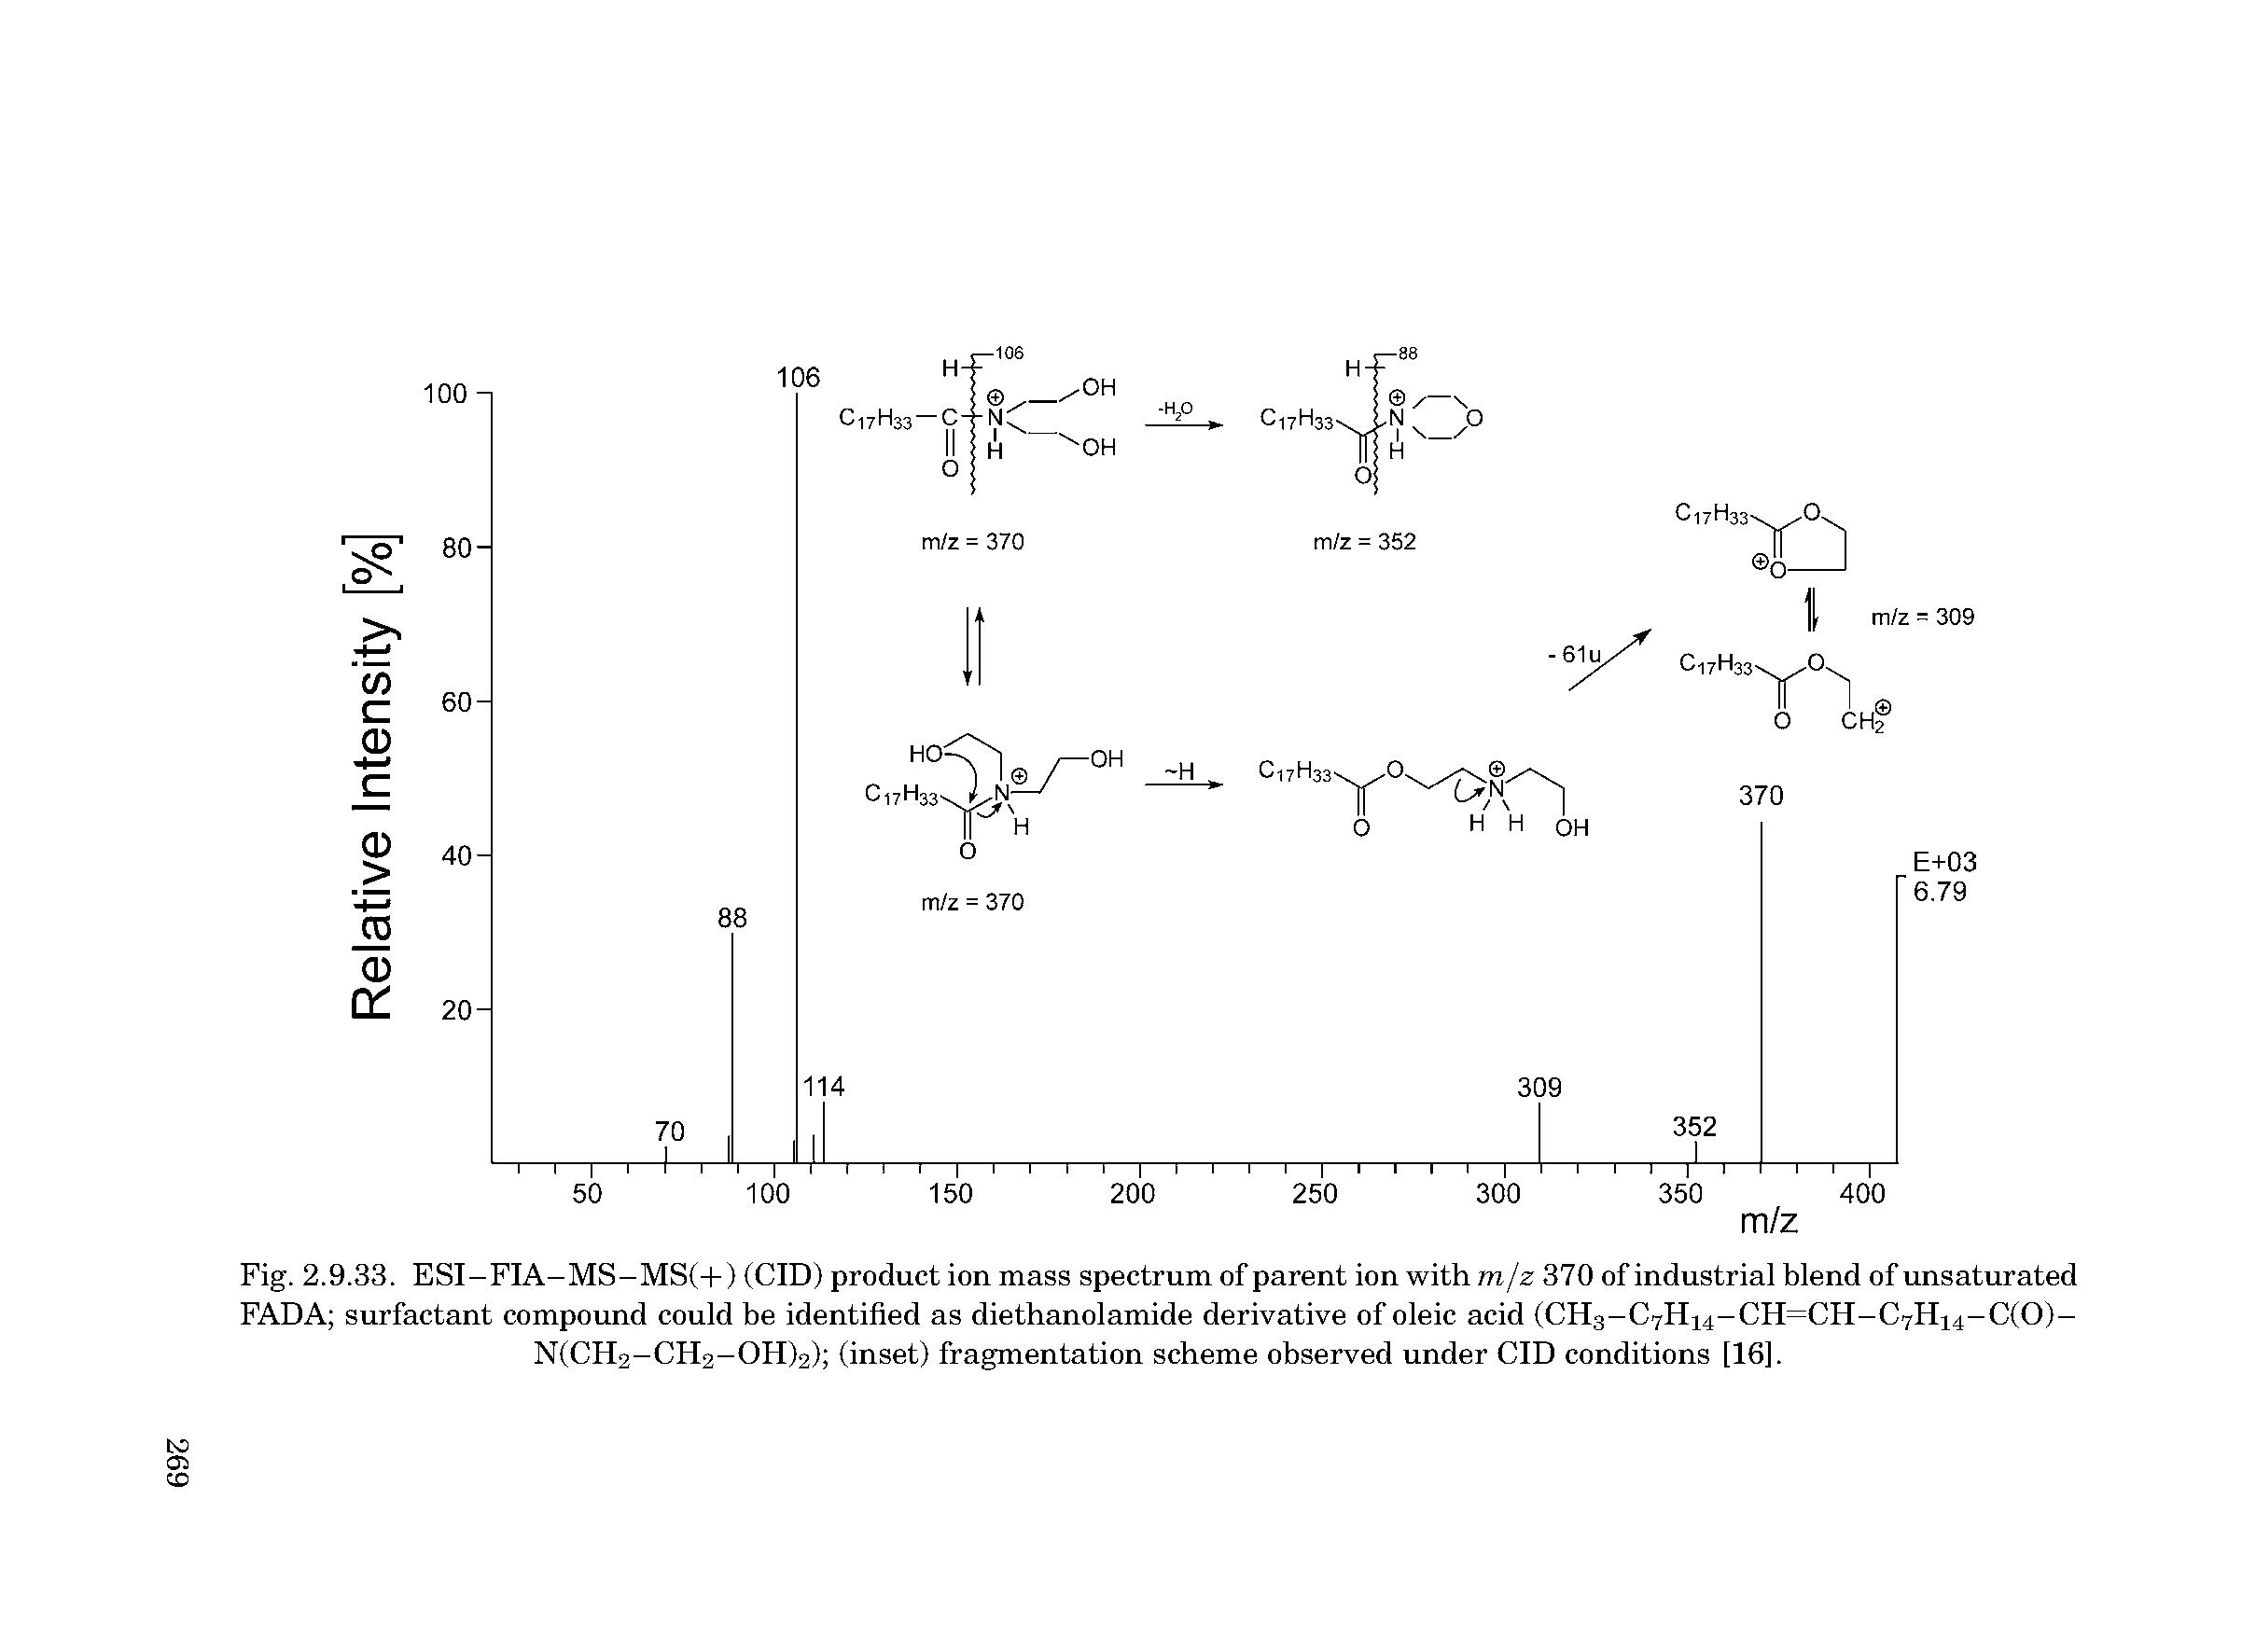 Fig. 2.9.33. ESI-FIA-MS-MS(+) (CID) product ion mass spectrum of parent ion with m/z 370 of industrial blend of unsaturated FADA surfactant compound could be identified as diethanolamide derivative of oleic acid (CH3-C7H14-CH=CH-C7H14-C(0)-N(CH2-CH2-OH)2) (inset) fragmentation scheme observed under CID conditions [16].